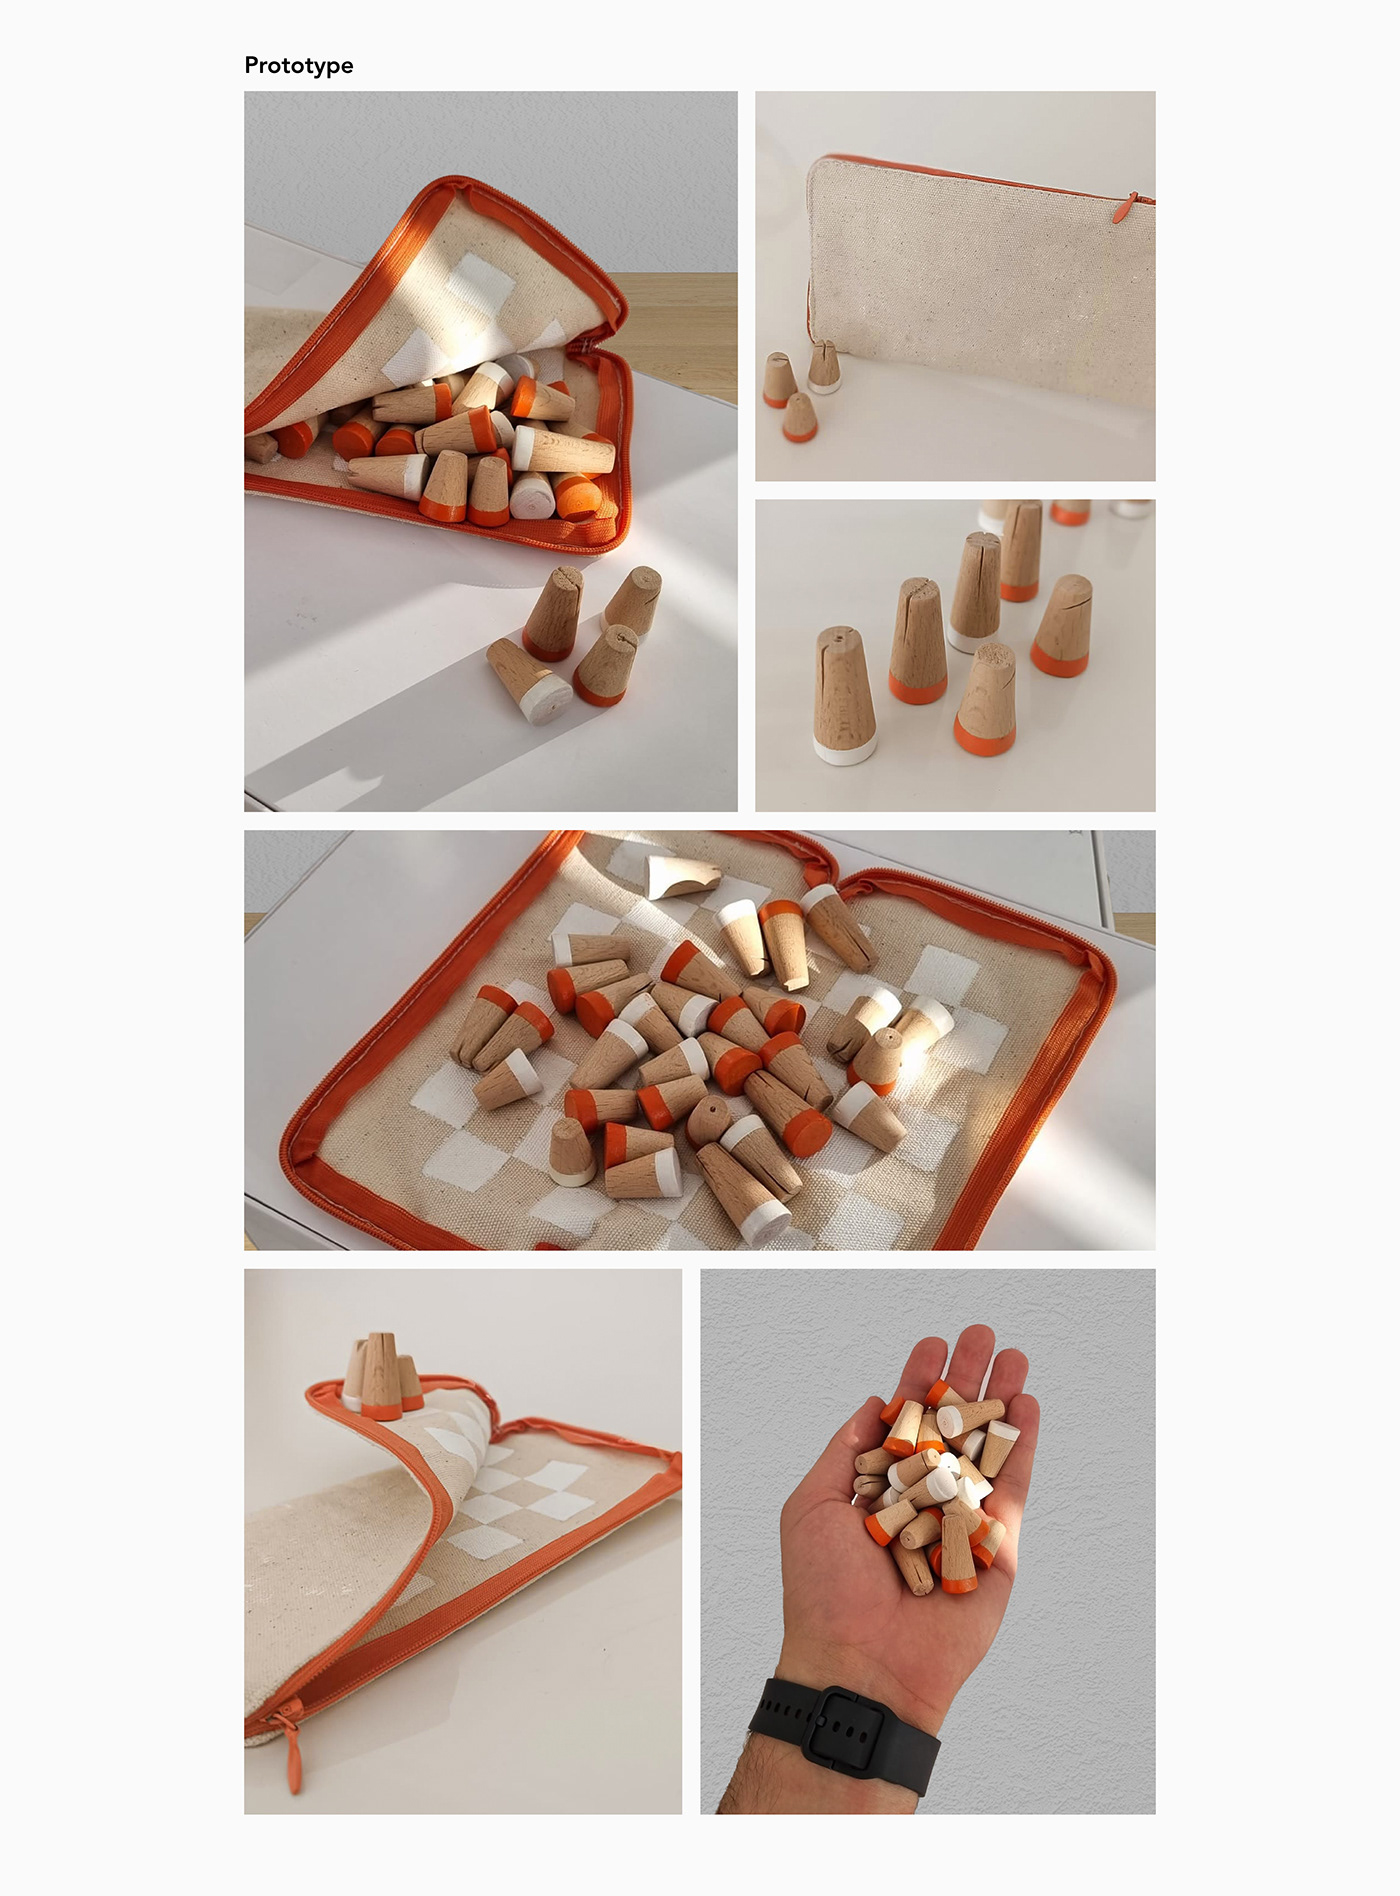 chess chess set chess pieces chess design product industrial design  wood wooden toys product design 